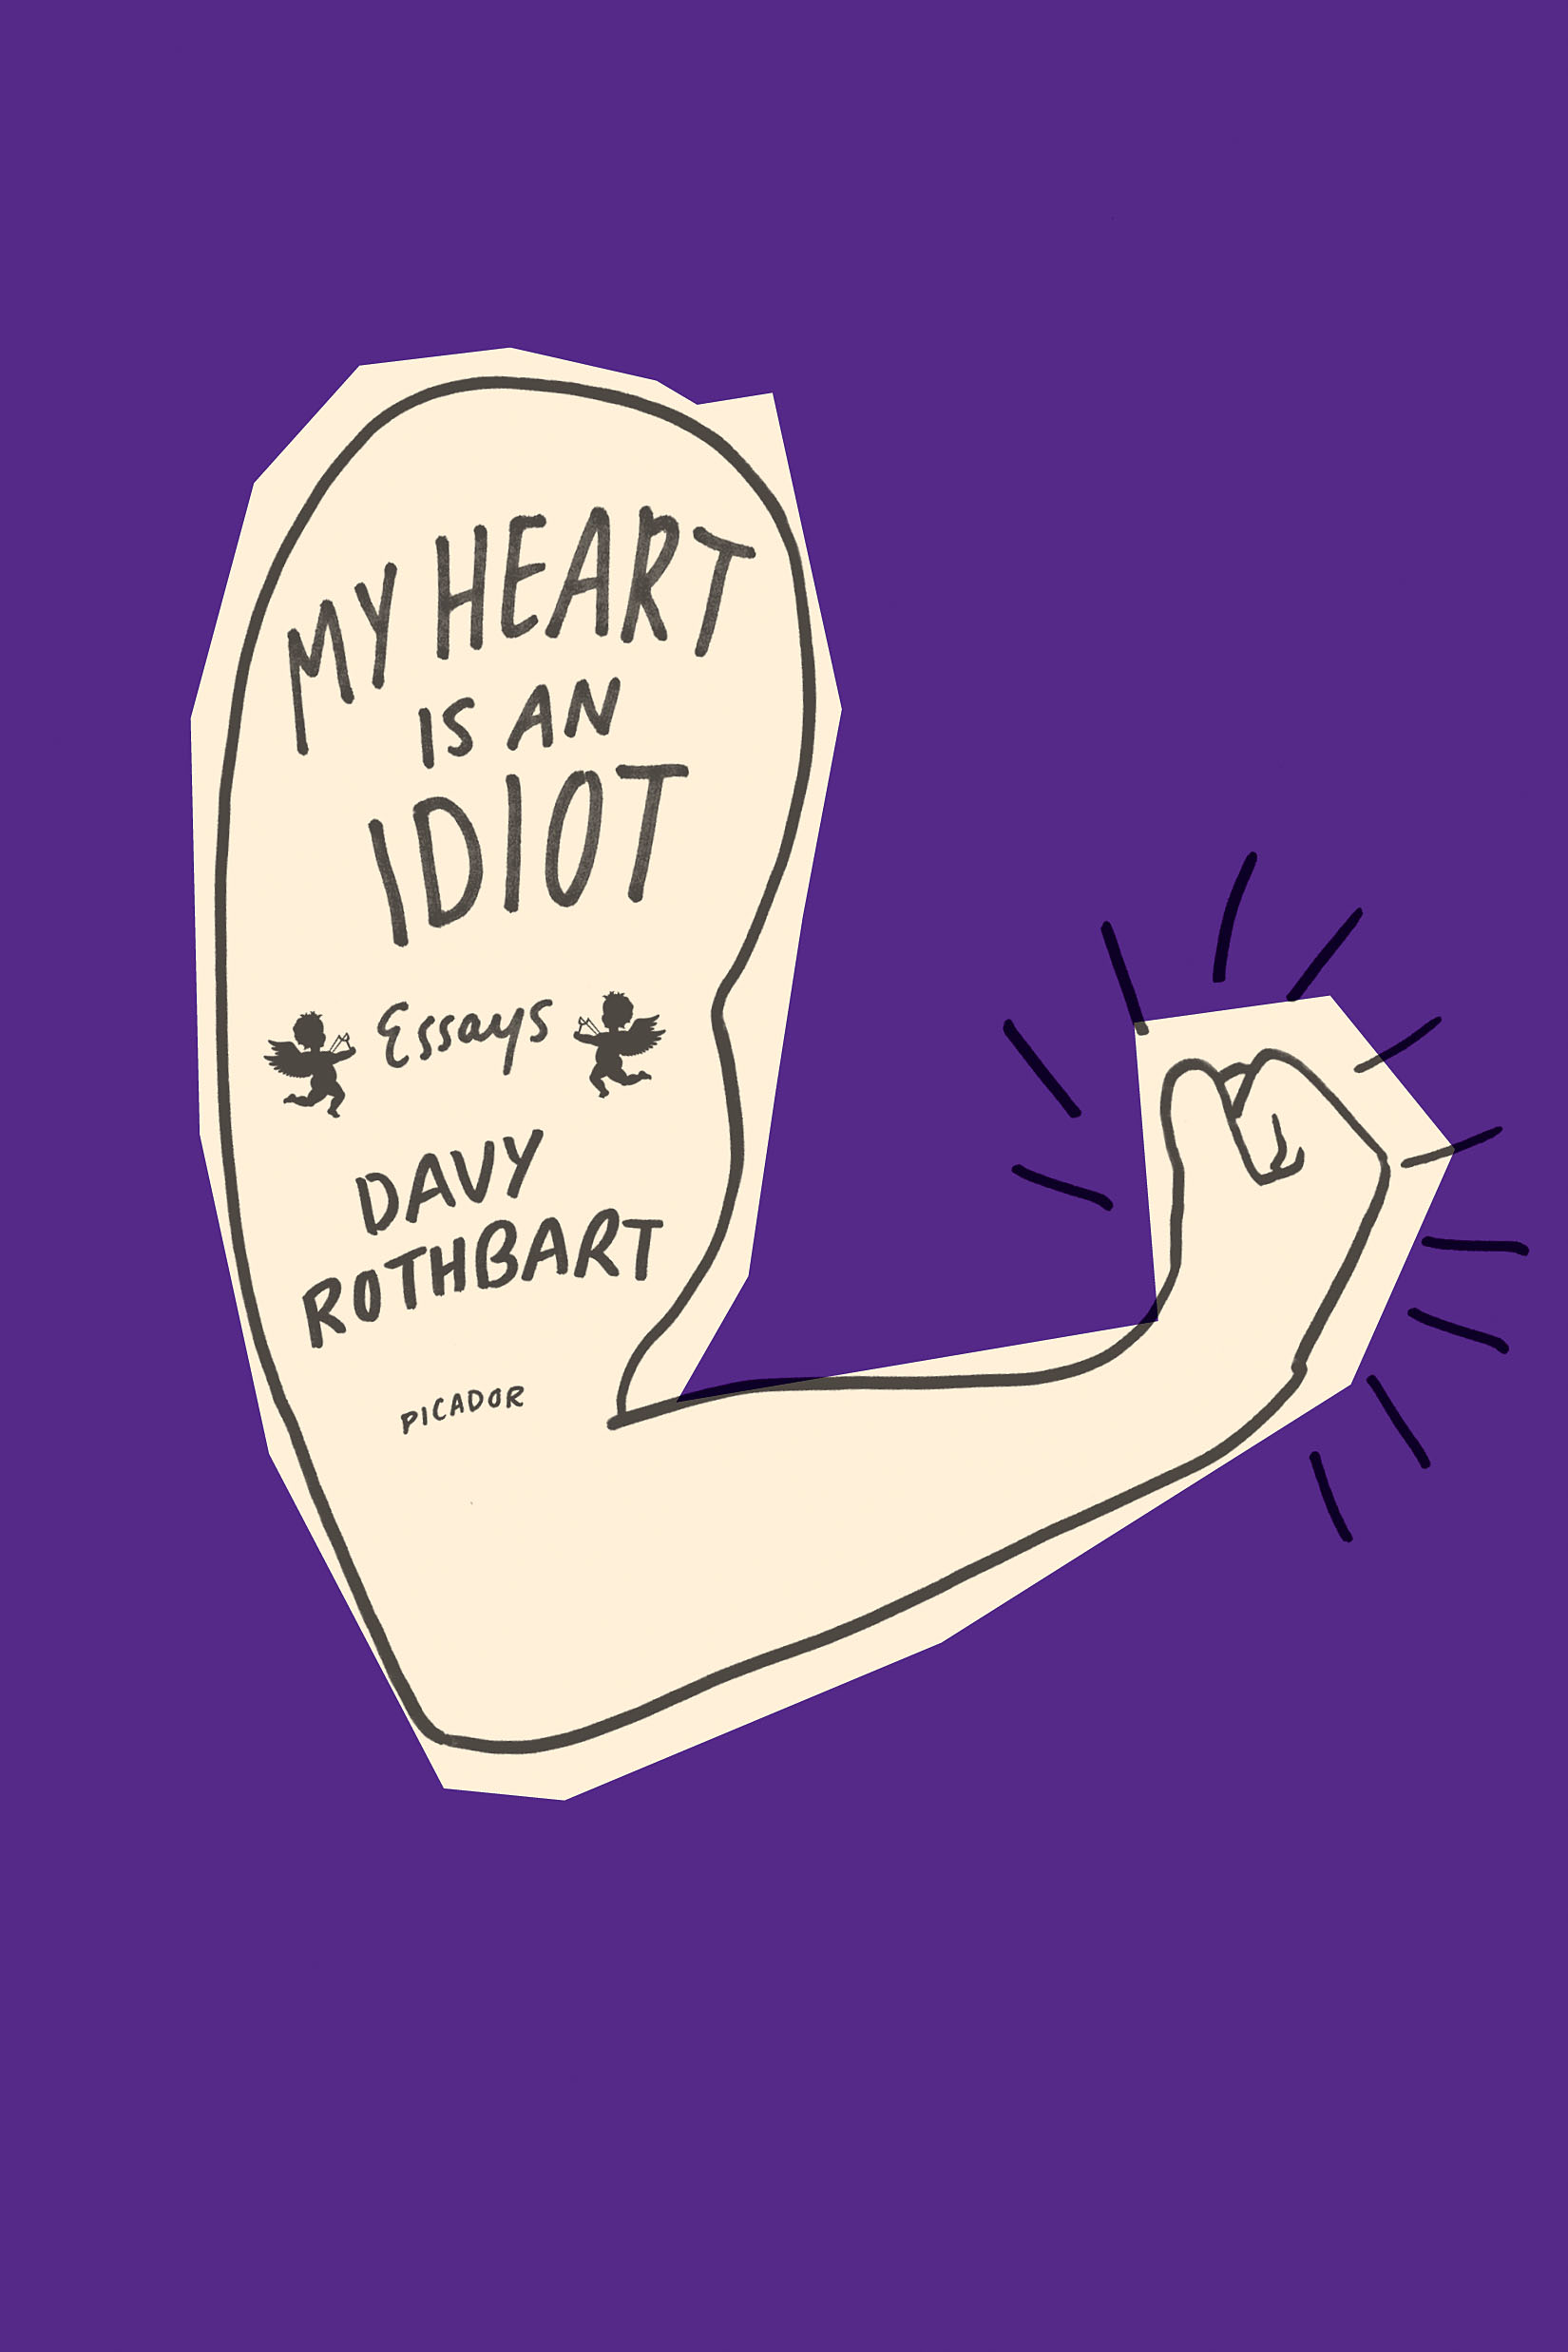 Paperback Launch: My Heart is an Idiot by Davy Rothbart